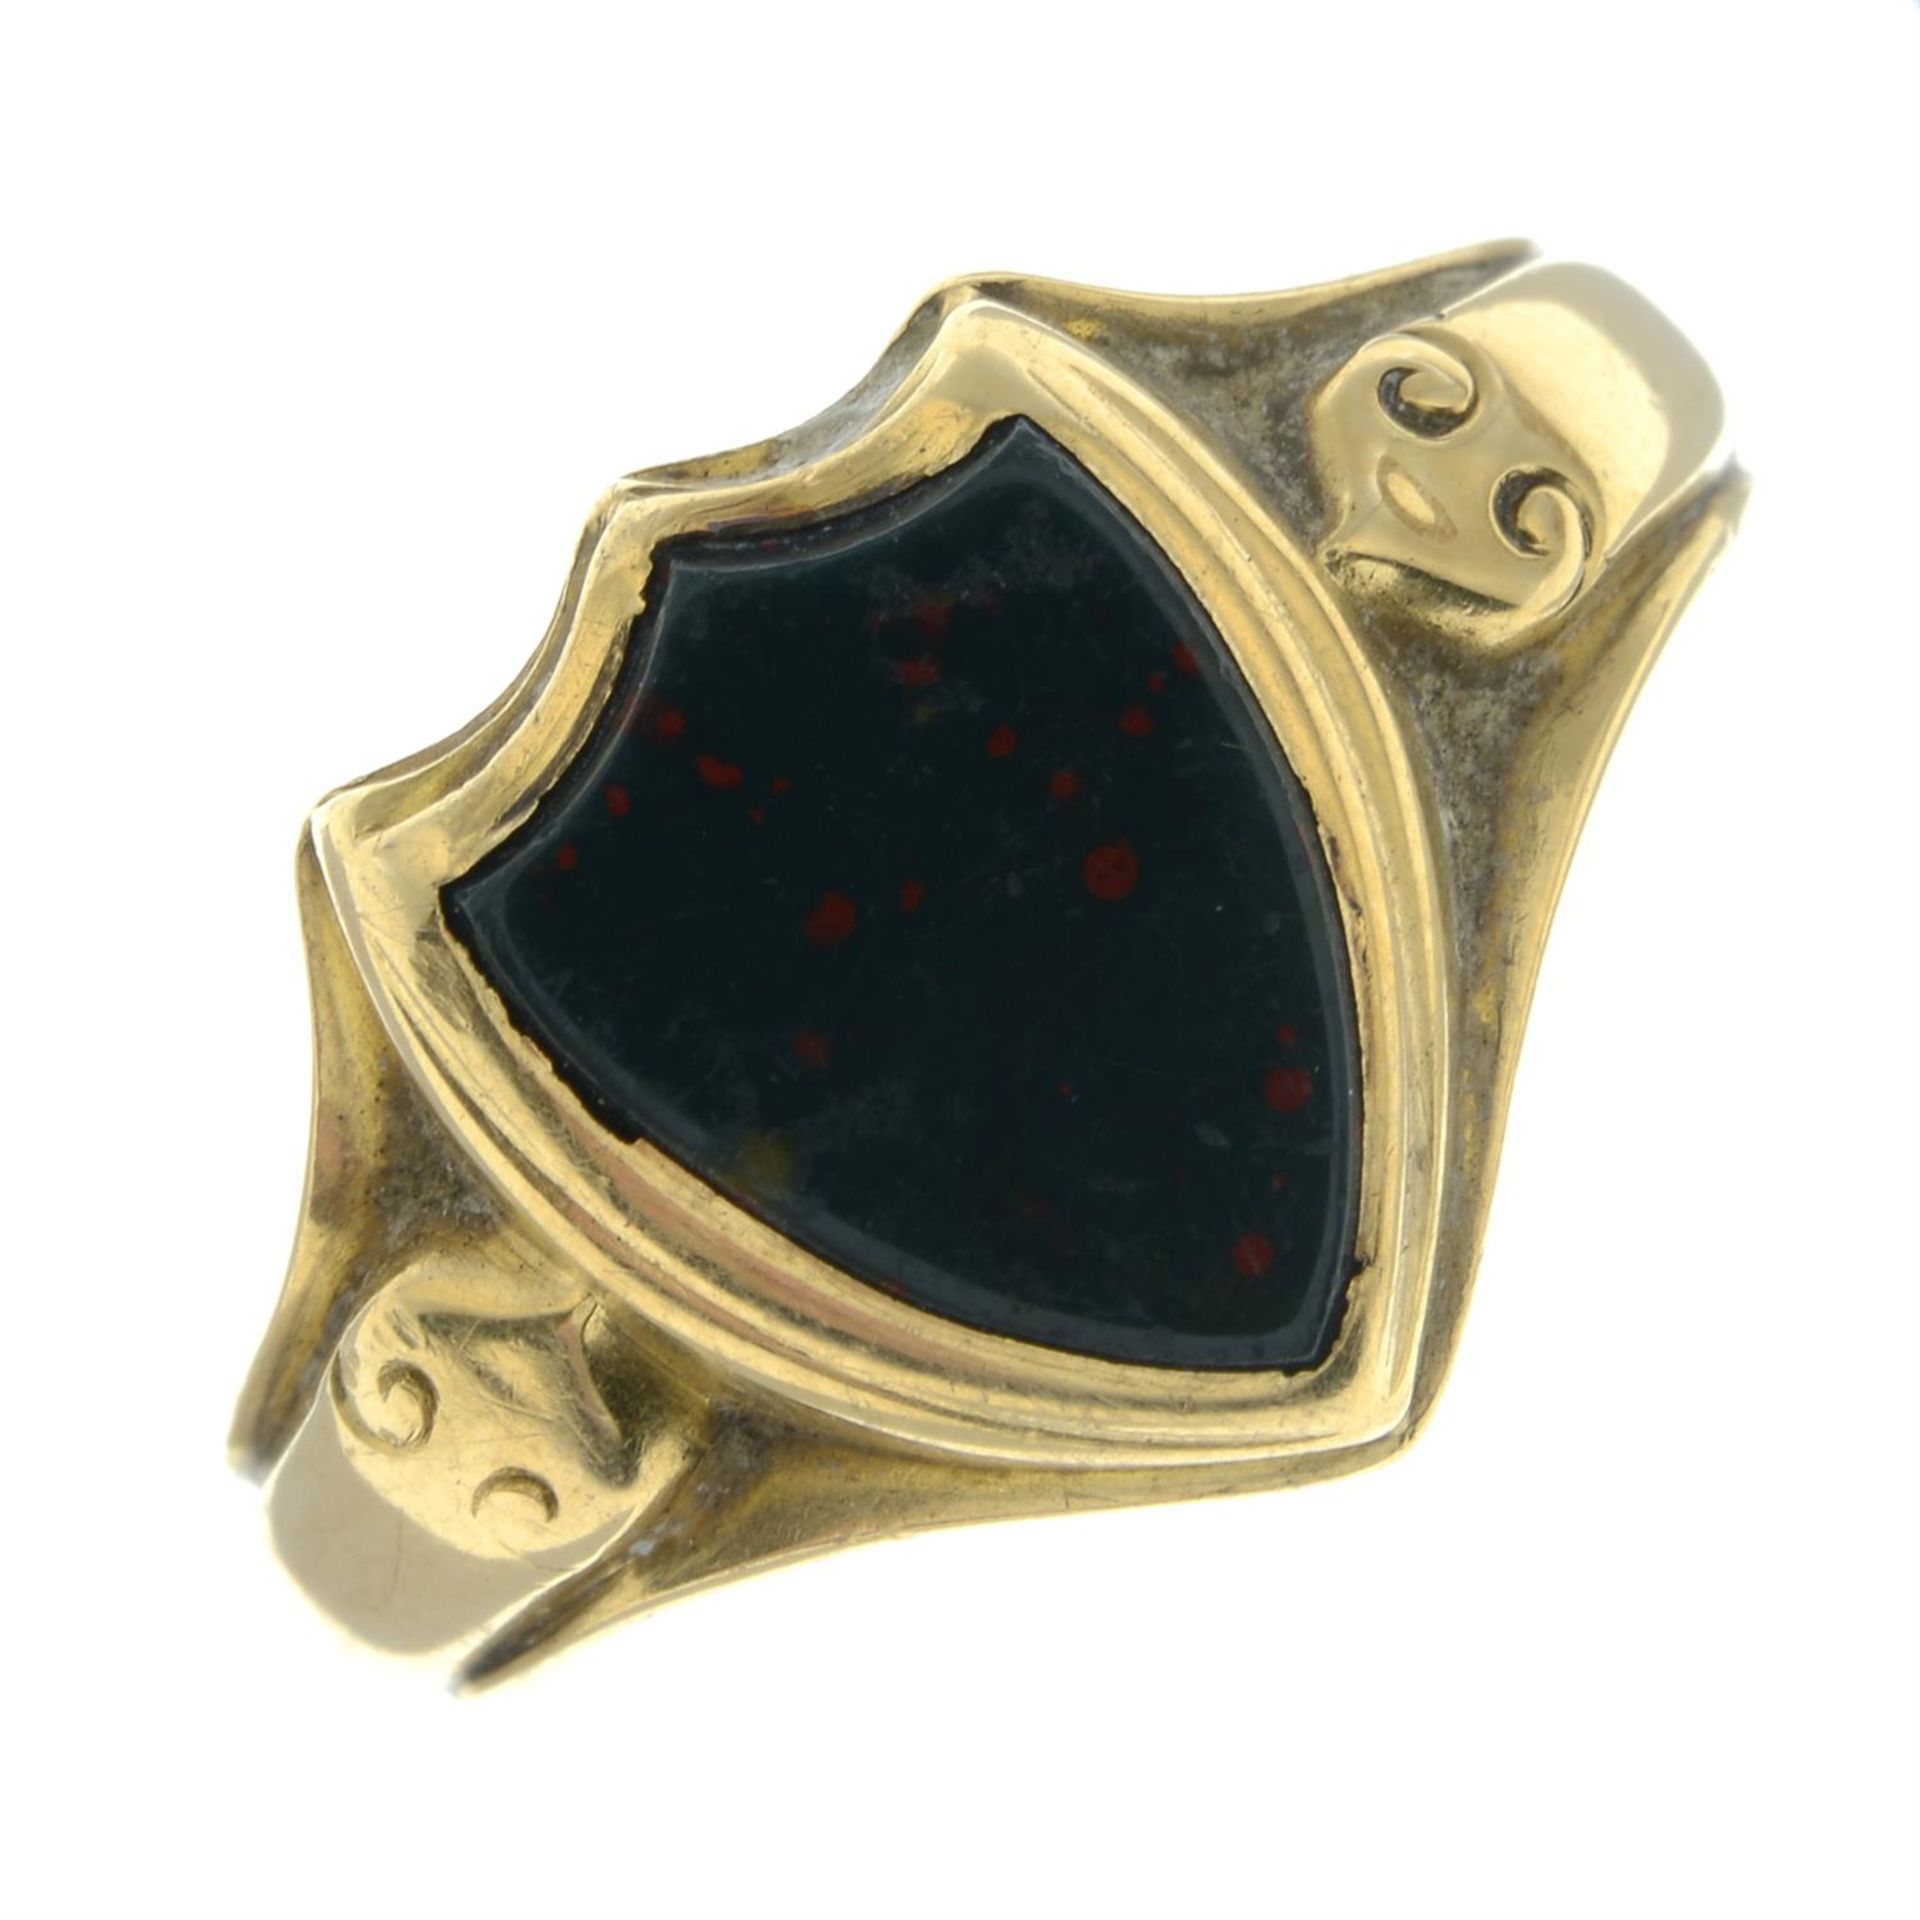 An Edwardian 18ct gold shield-shape glass signet ring. - Image 2 of 5